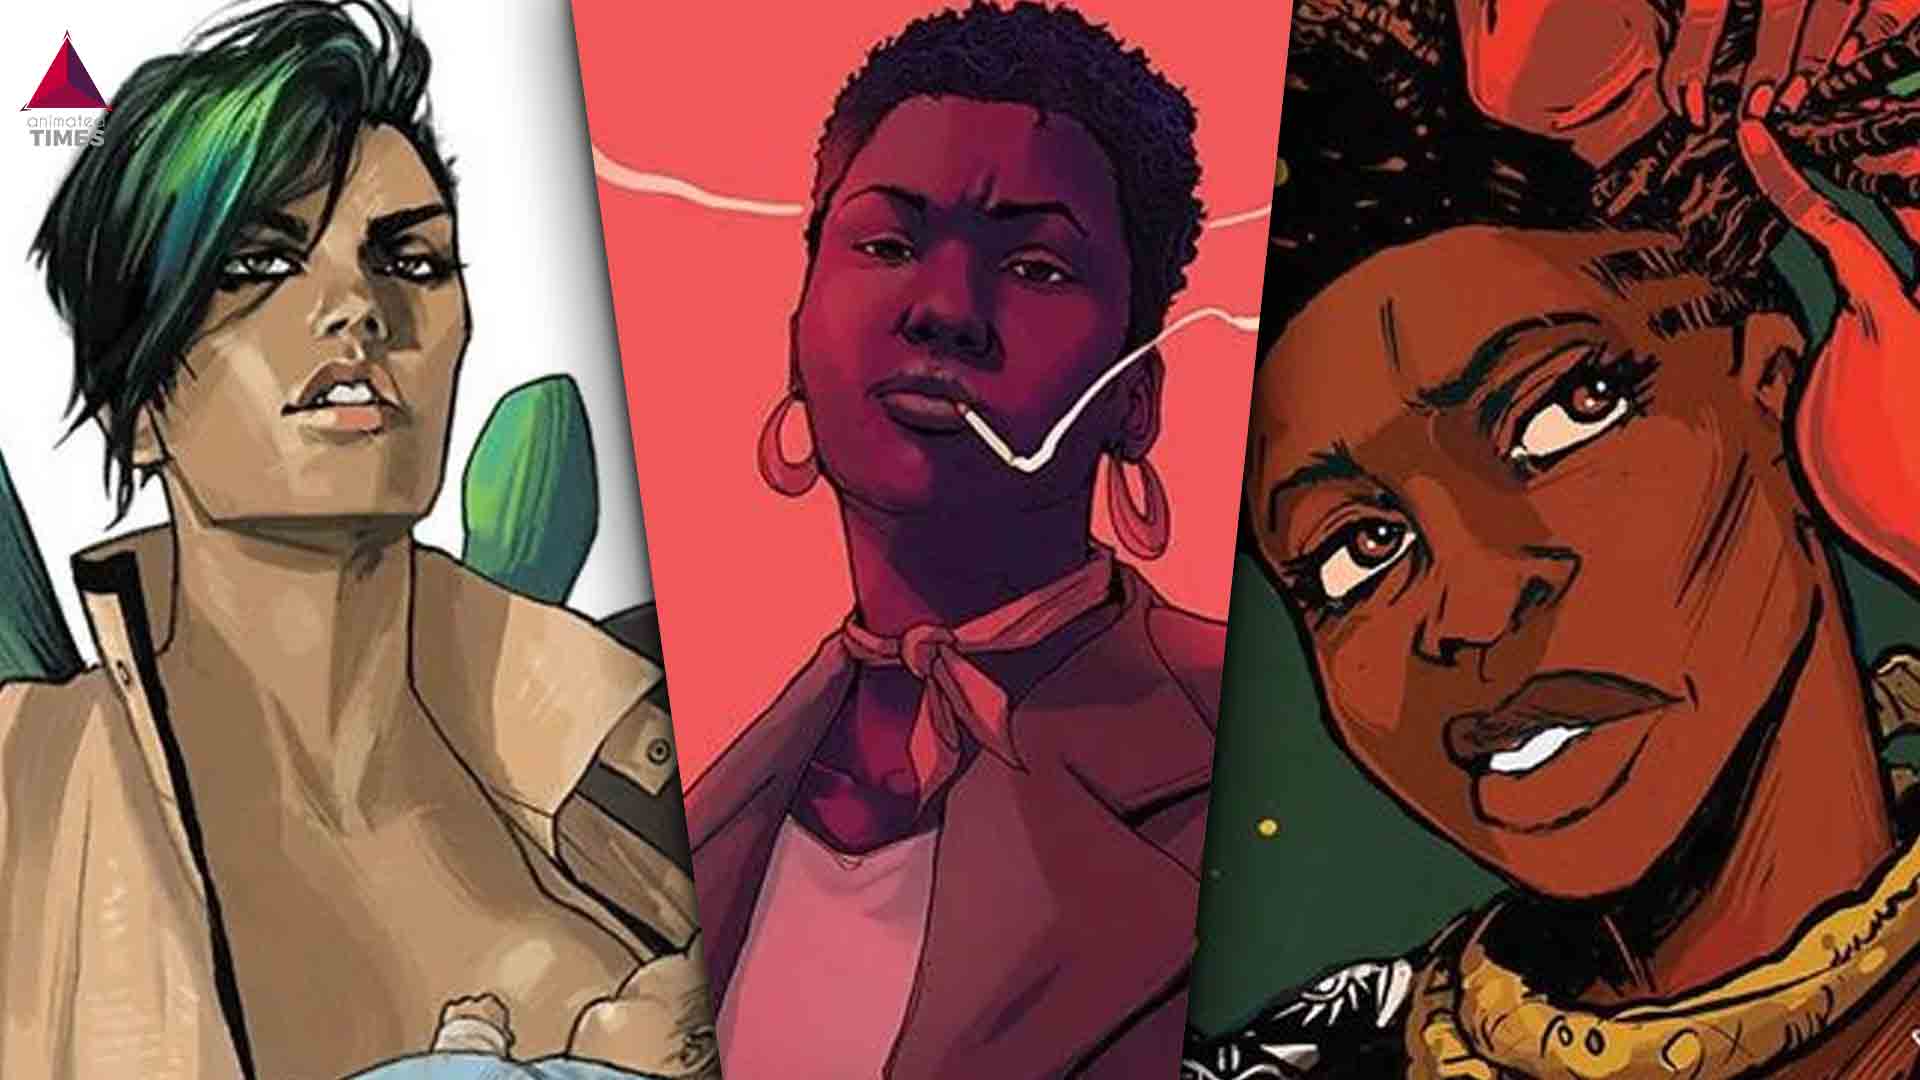 10 Best Non-Superhero Graphic Novels That Would Make Amazing TV Shows